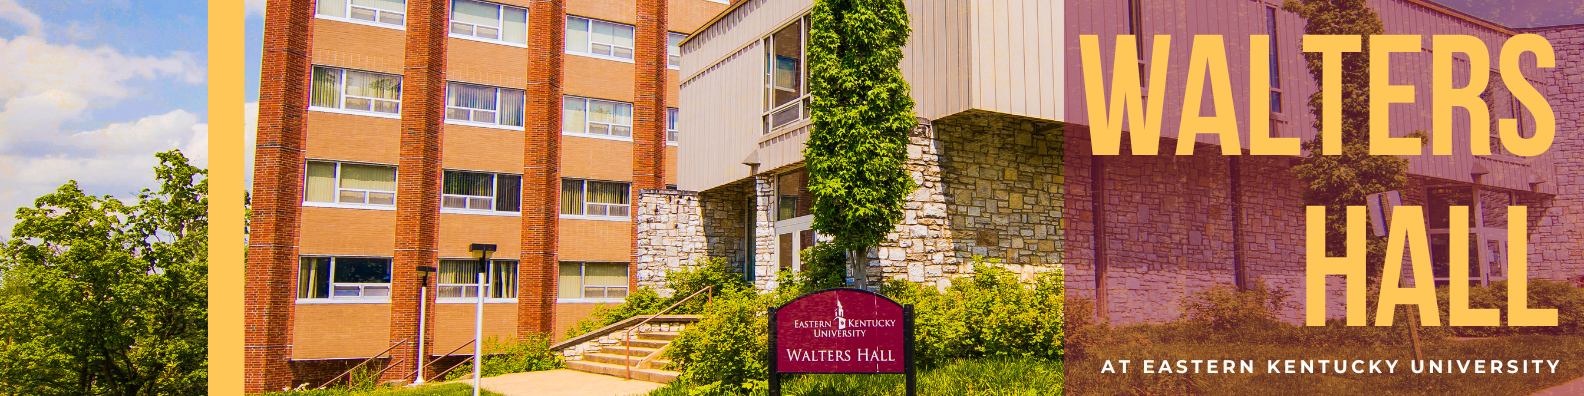 An image of Walters Hall at EKU, with the text "Walters Hall".